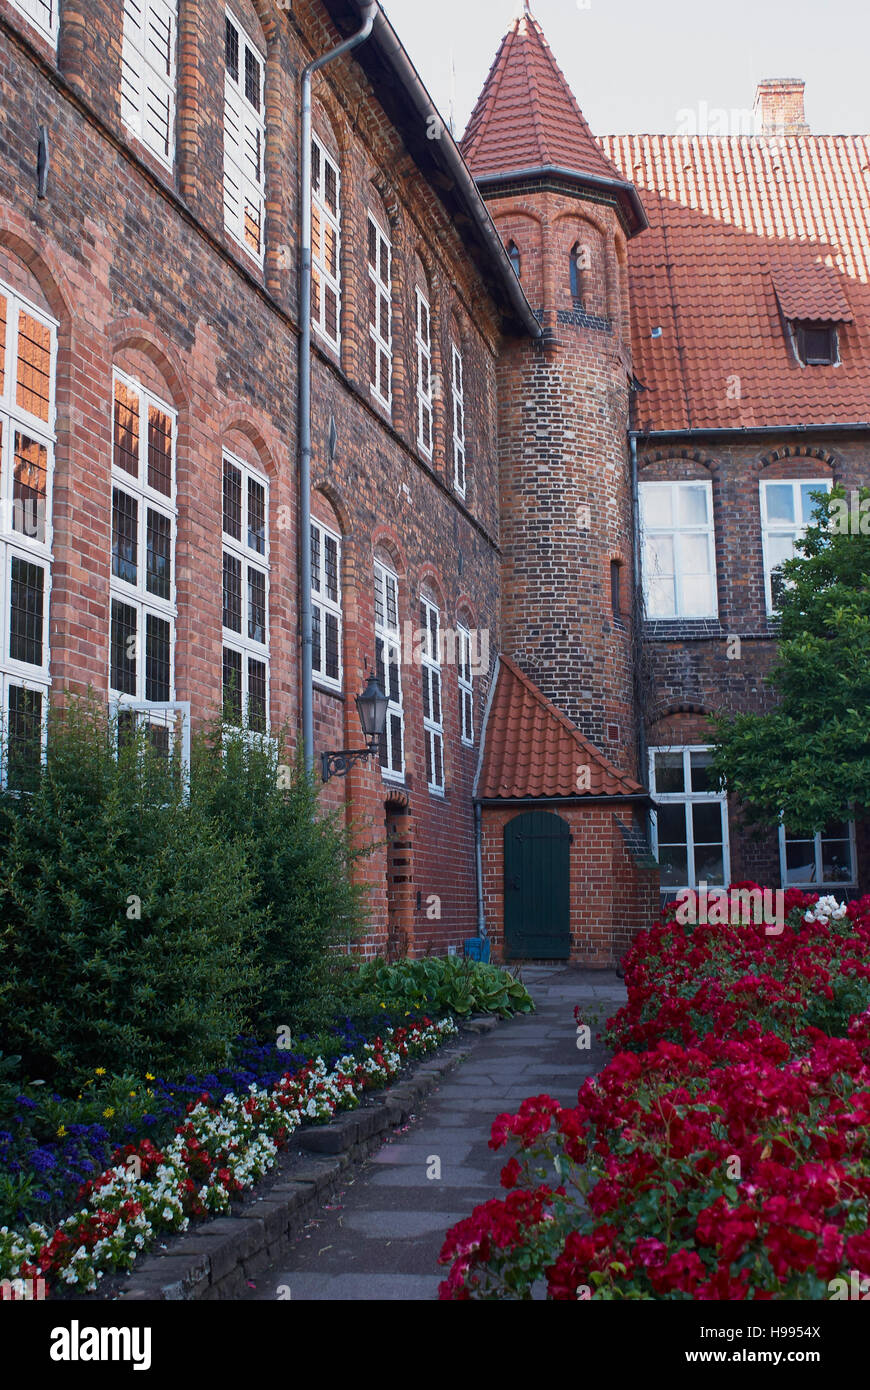 Old gothic brick architecture building in the historical city center of Lüneburg, Germany Stock Photo